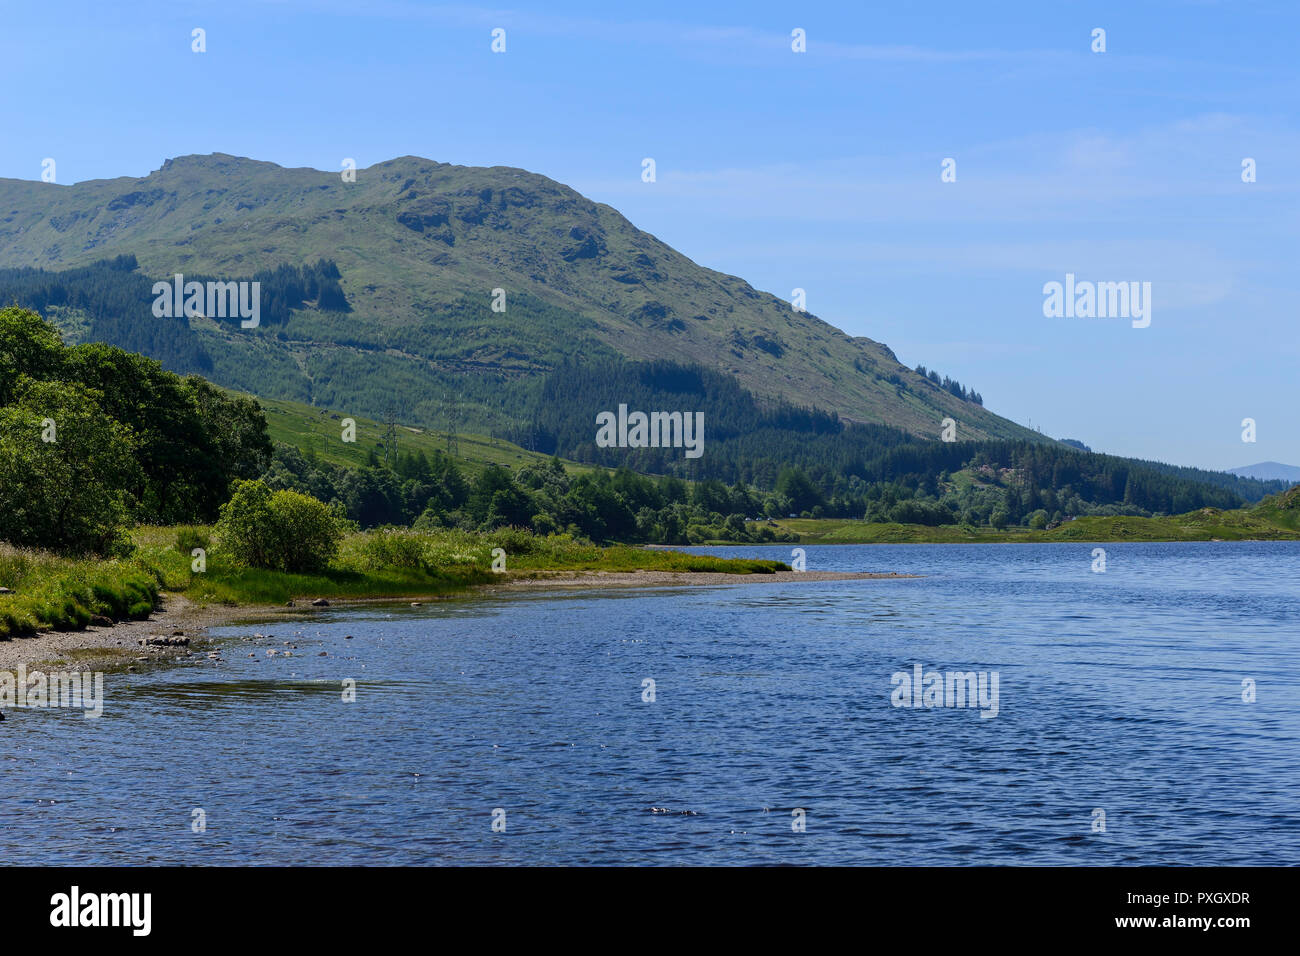 Loch Lubhair in the Loch Lomond and Trossachs National Park, east of Crainlarich on the A85, Stirling Region, Scotland Stock Photo